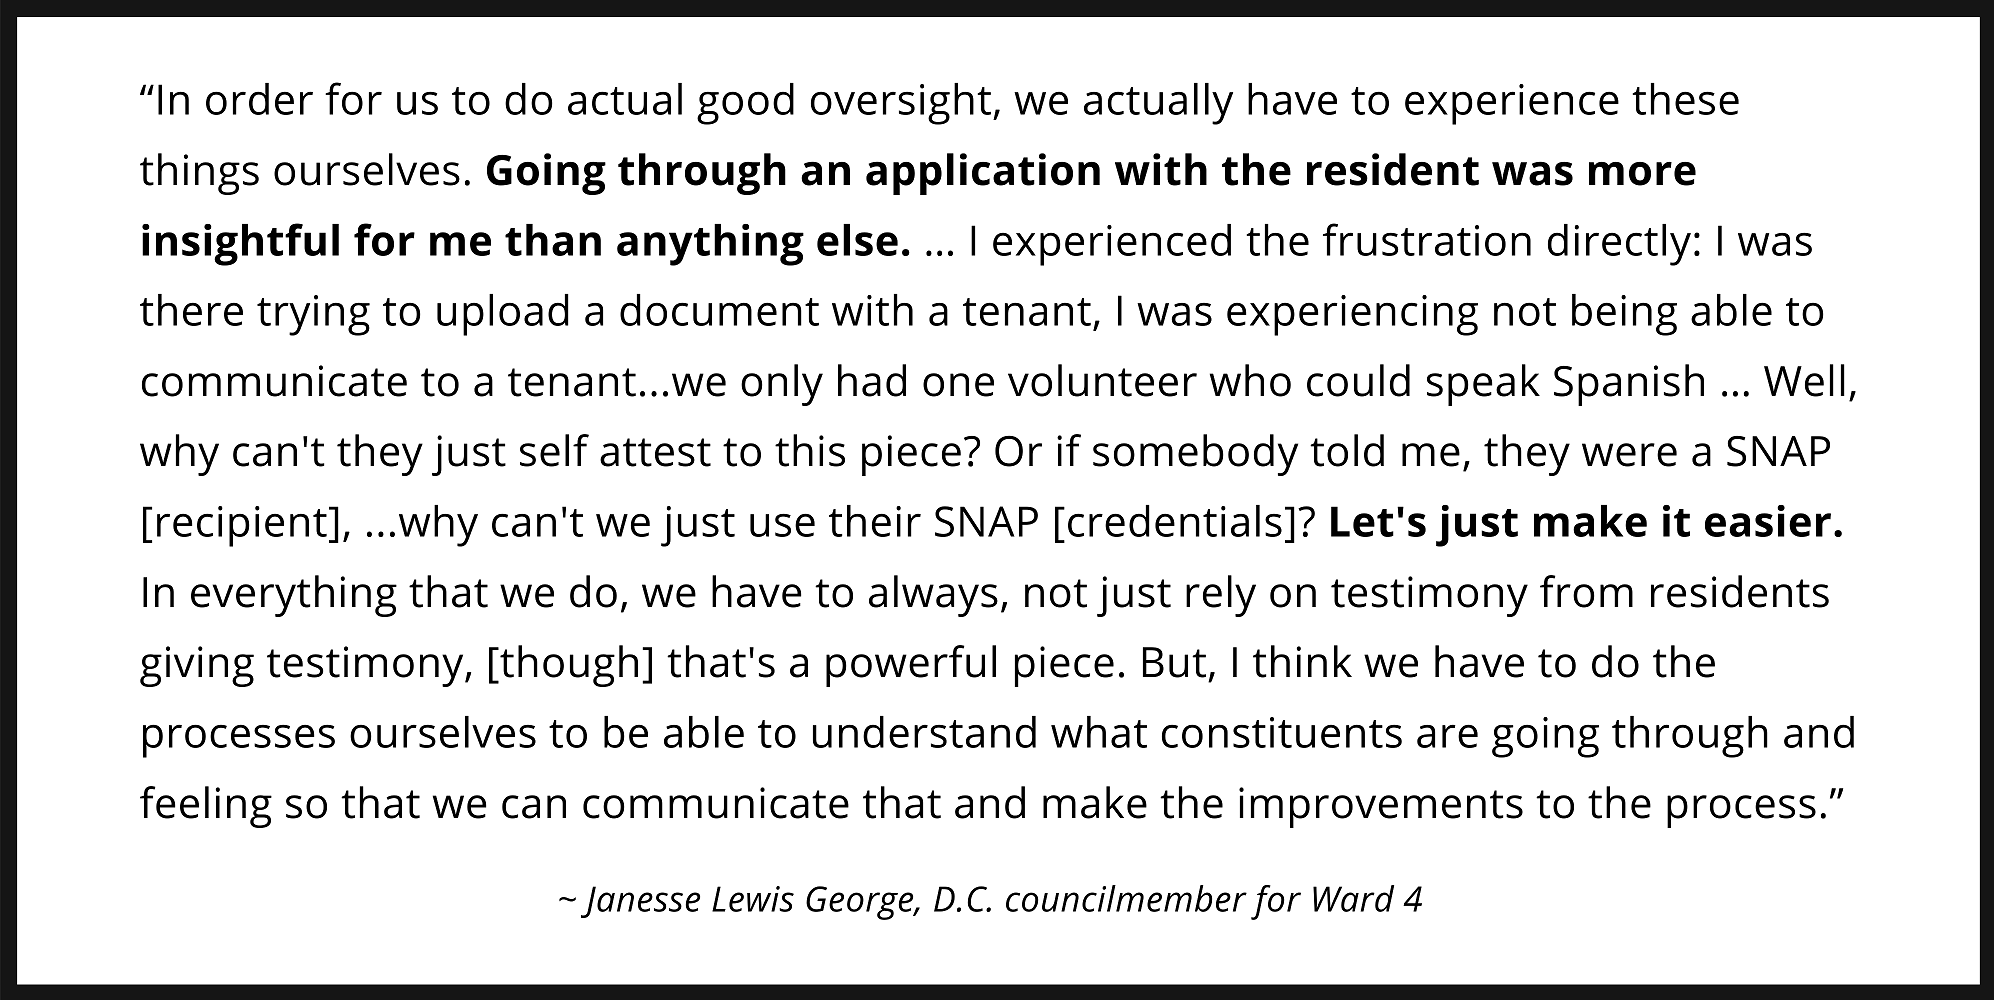 Graphic shows quote from D.C. councilmember Janeese Lewis George about emergency rental assistance